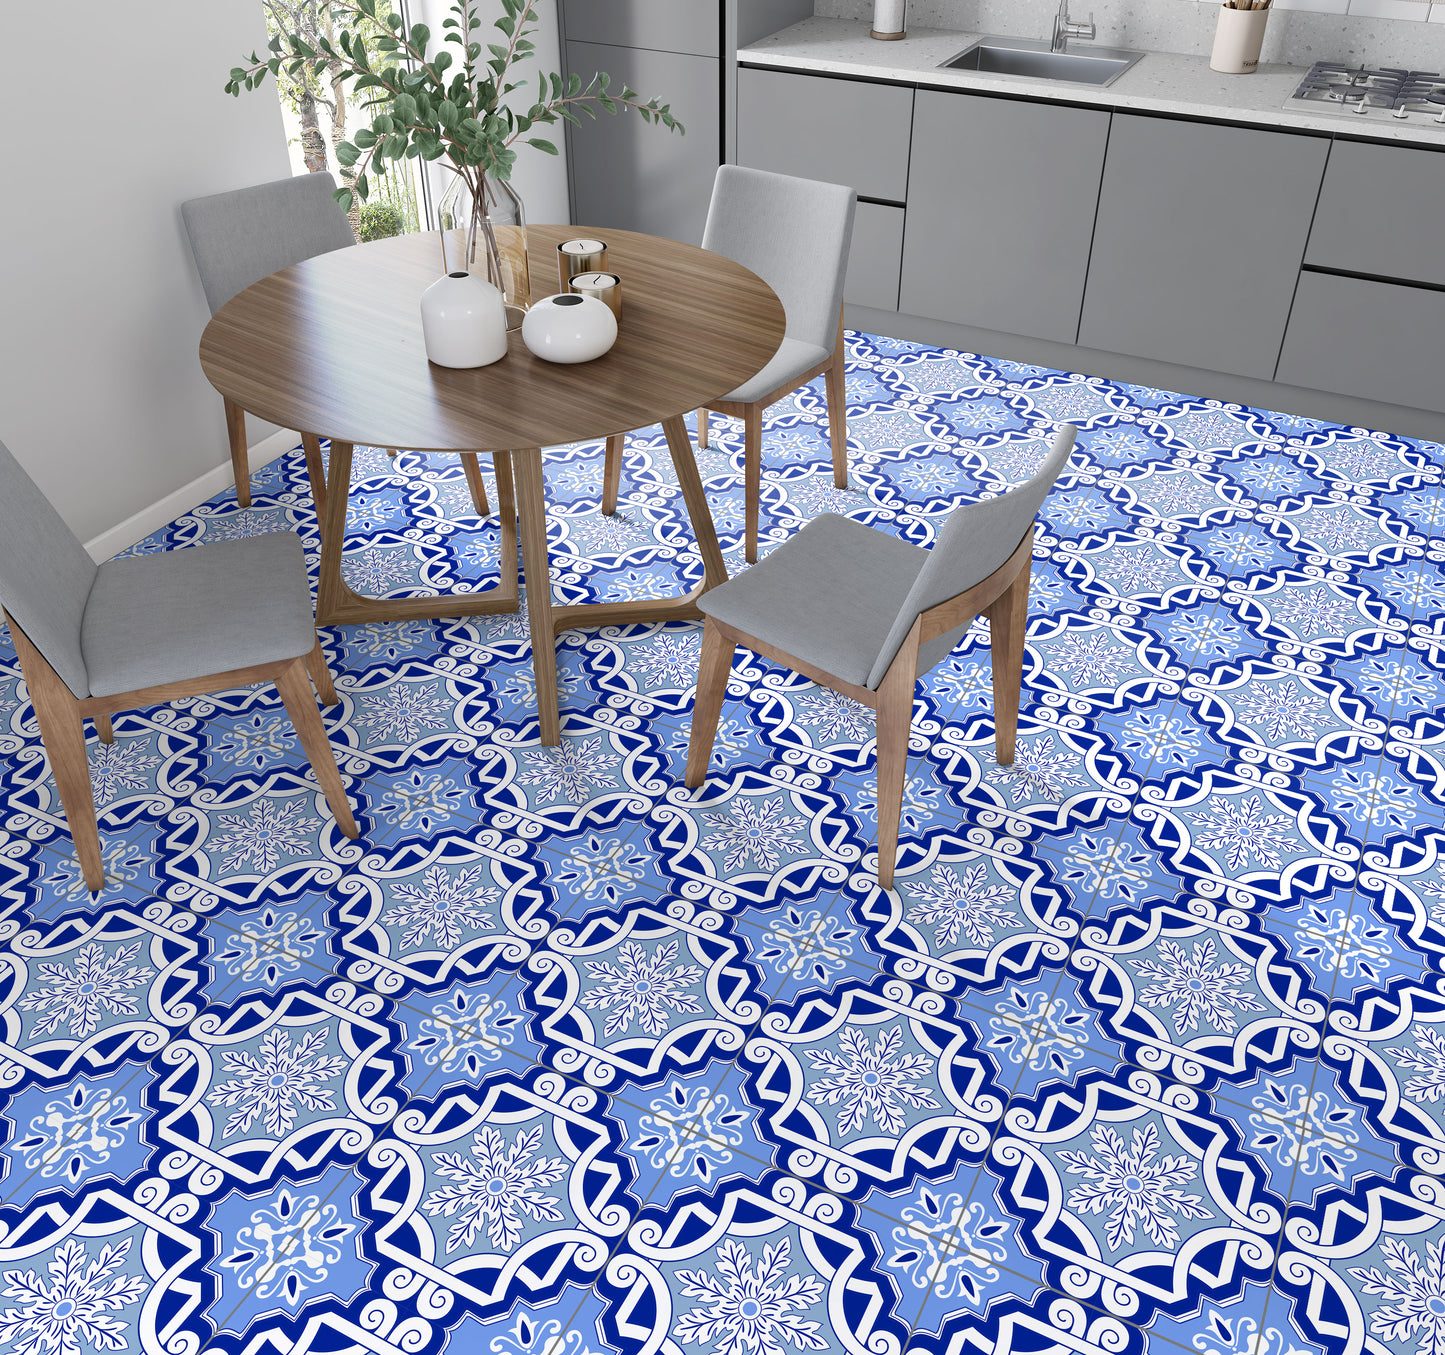 Cornflower Blue Frosted Flake Floor & Wall Tile Stickers